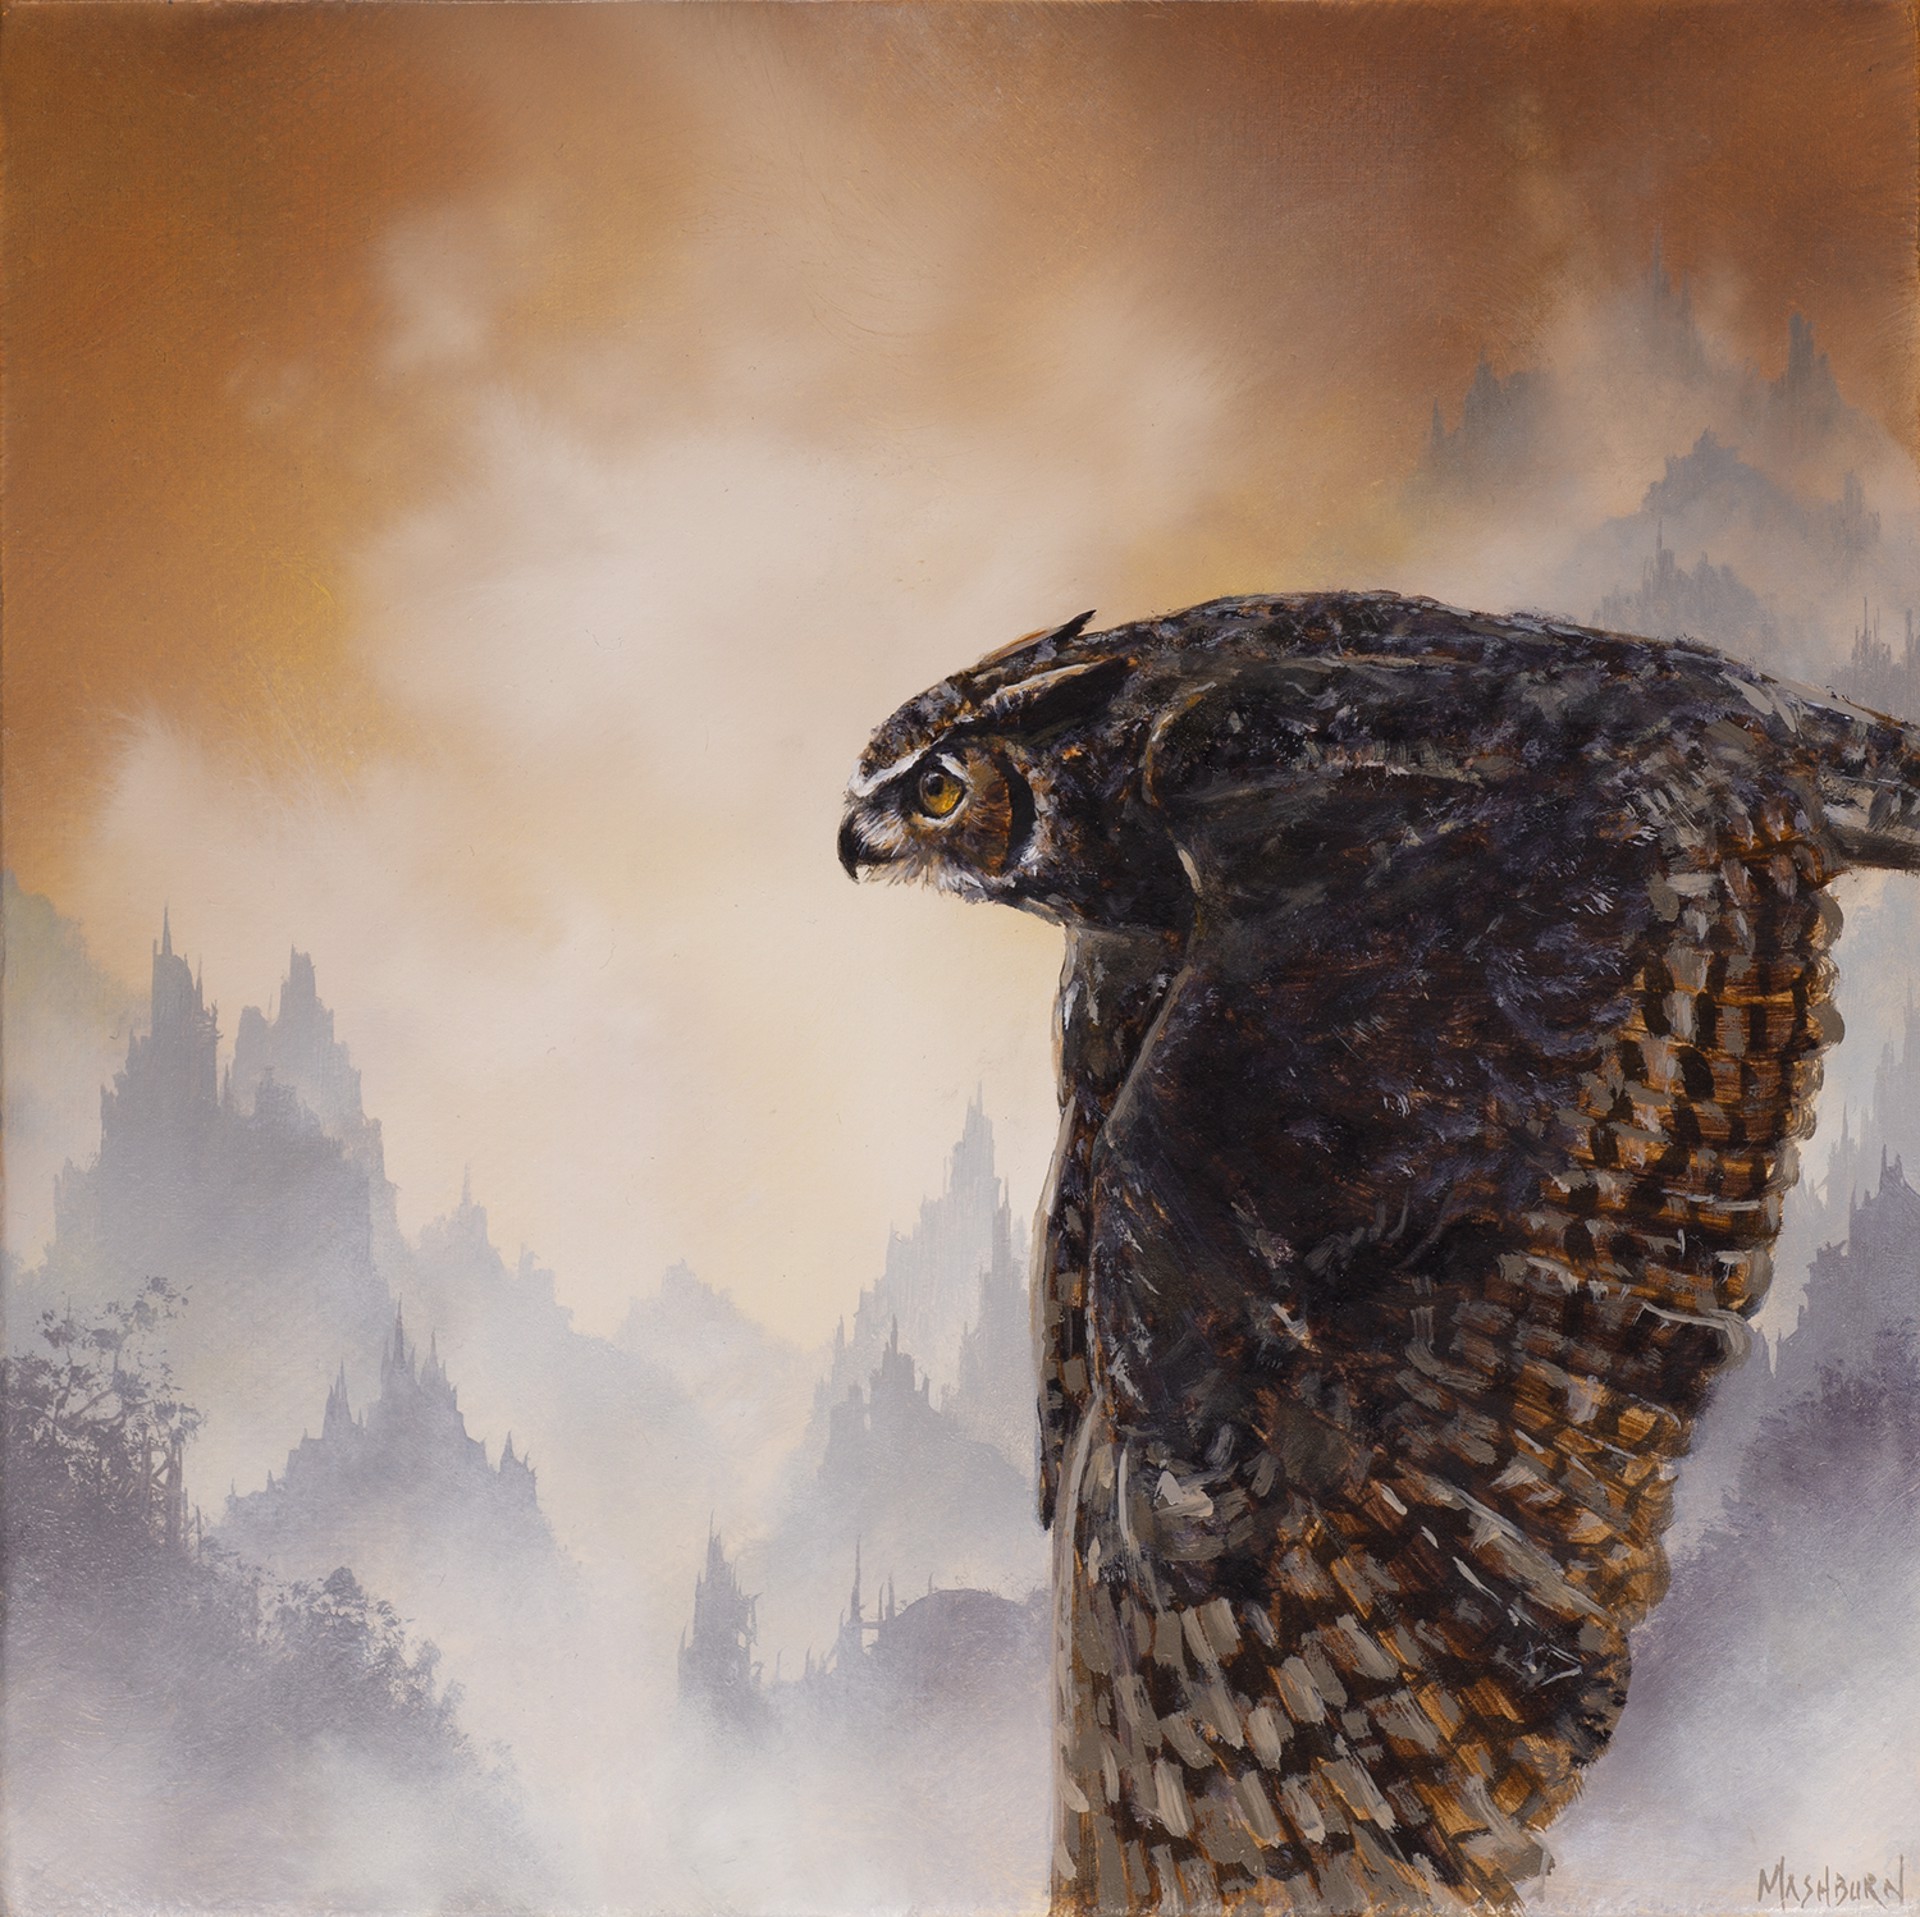 Great Horned Owl in Flight by Brian Mashburn